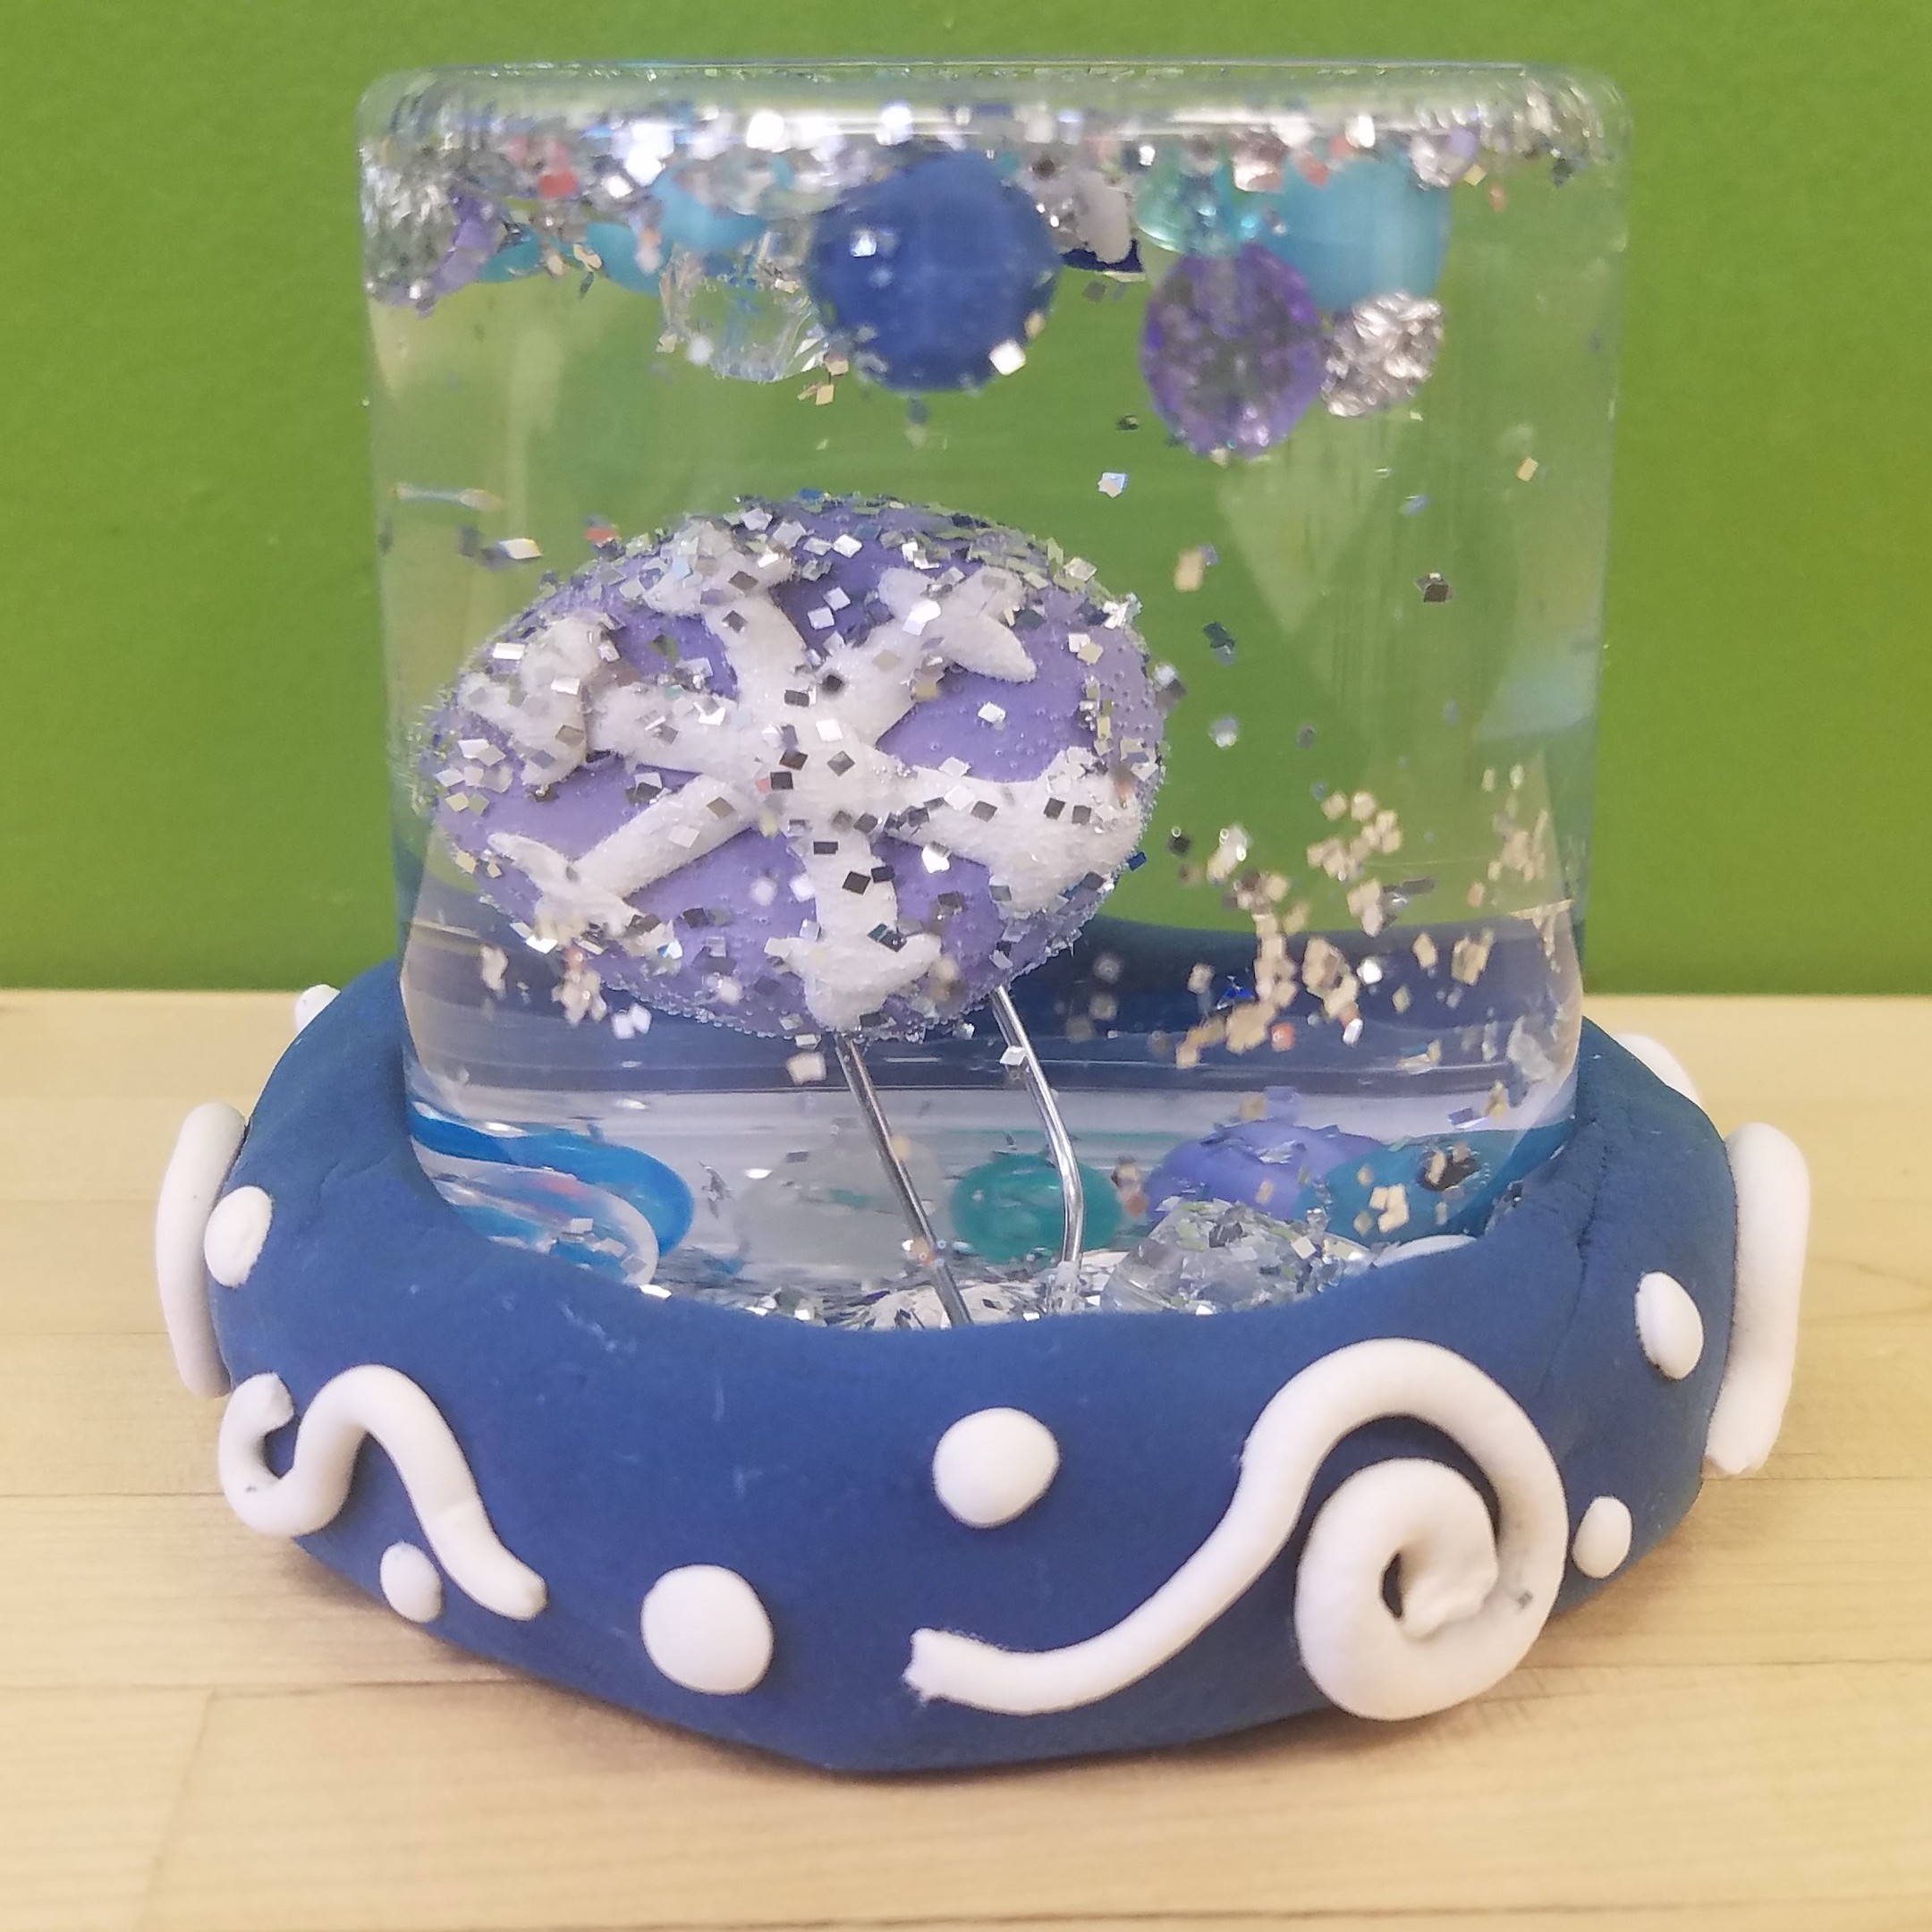 Kidcreate Studio - Fayetteville, How to Make a Snow Globe Art Project